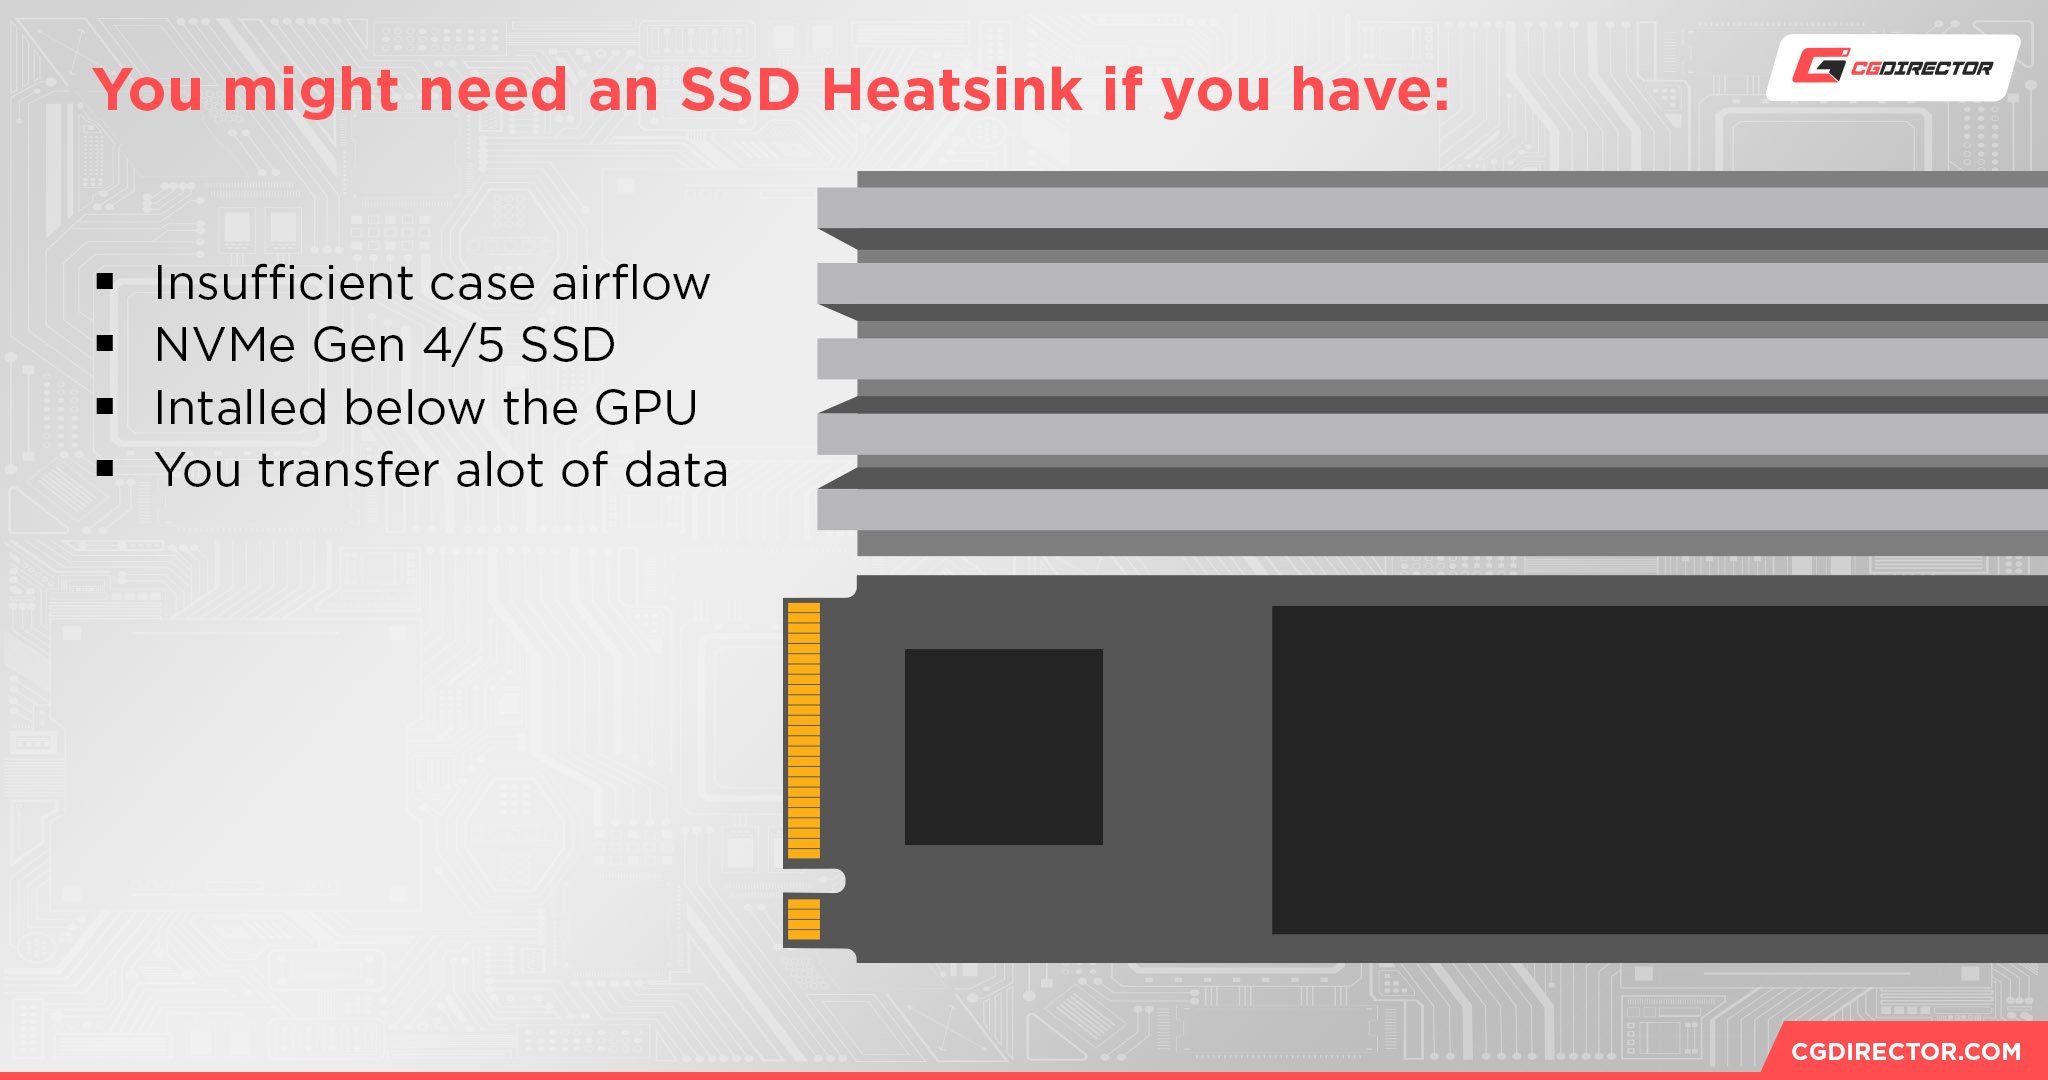 You might need an SSD Heatsink if you have